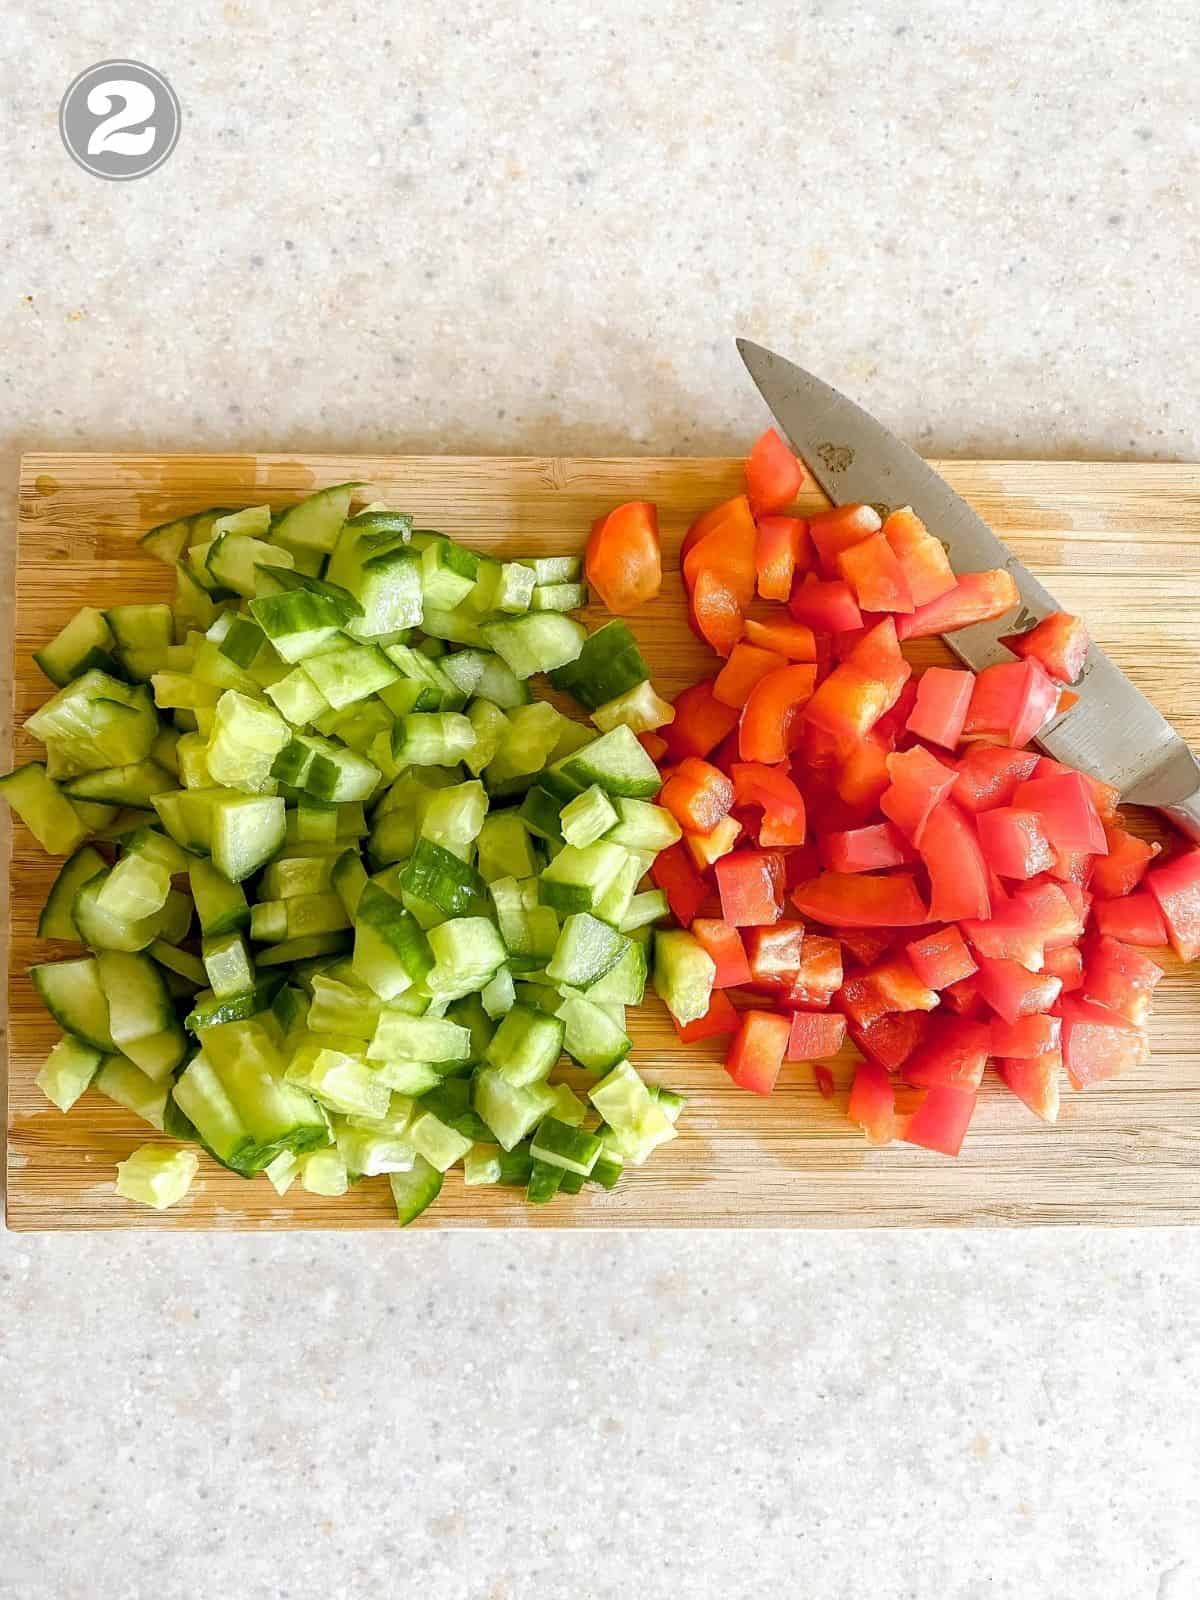 diced cucumber and bell pepper on a wooden board with a knife.